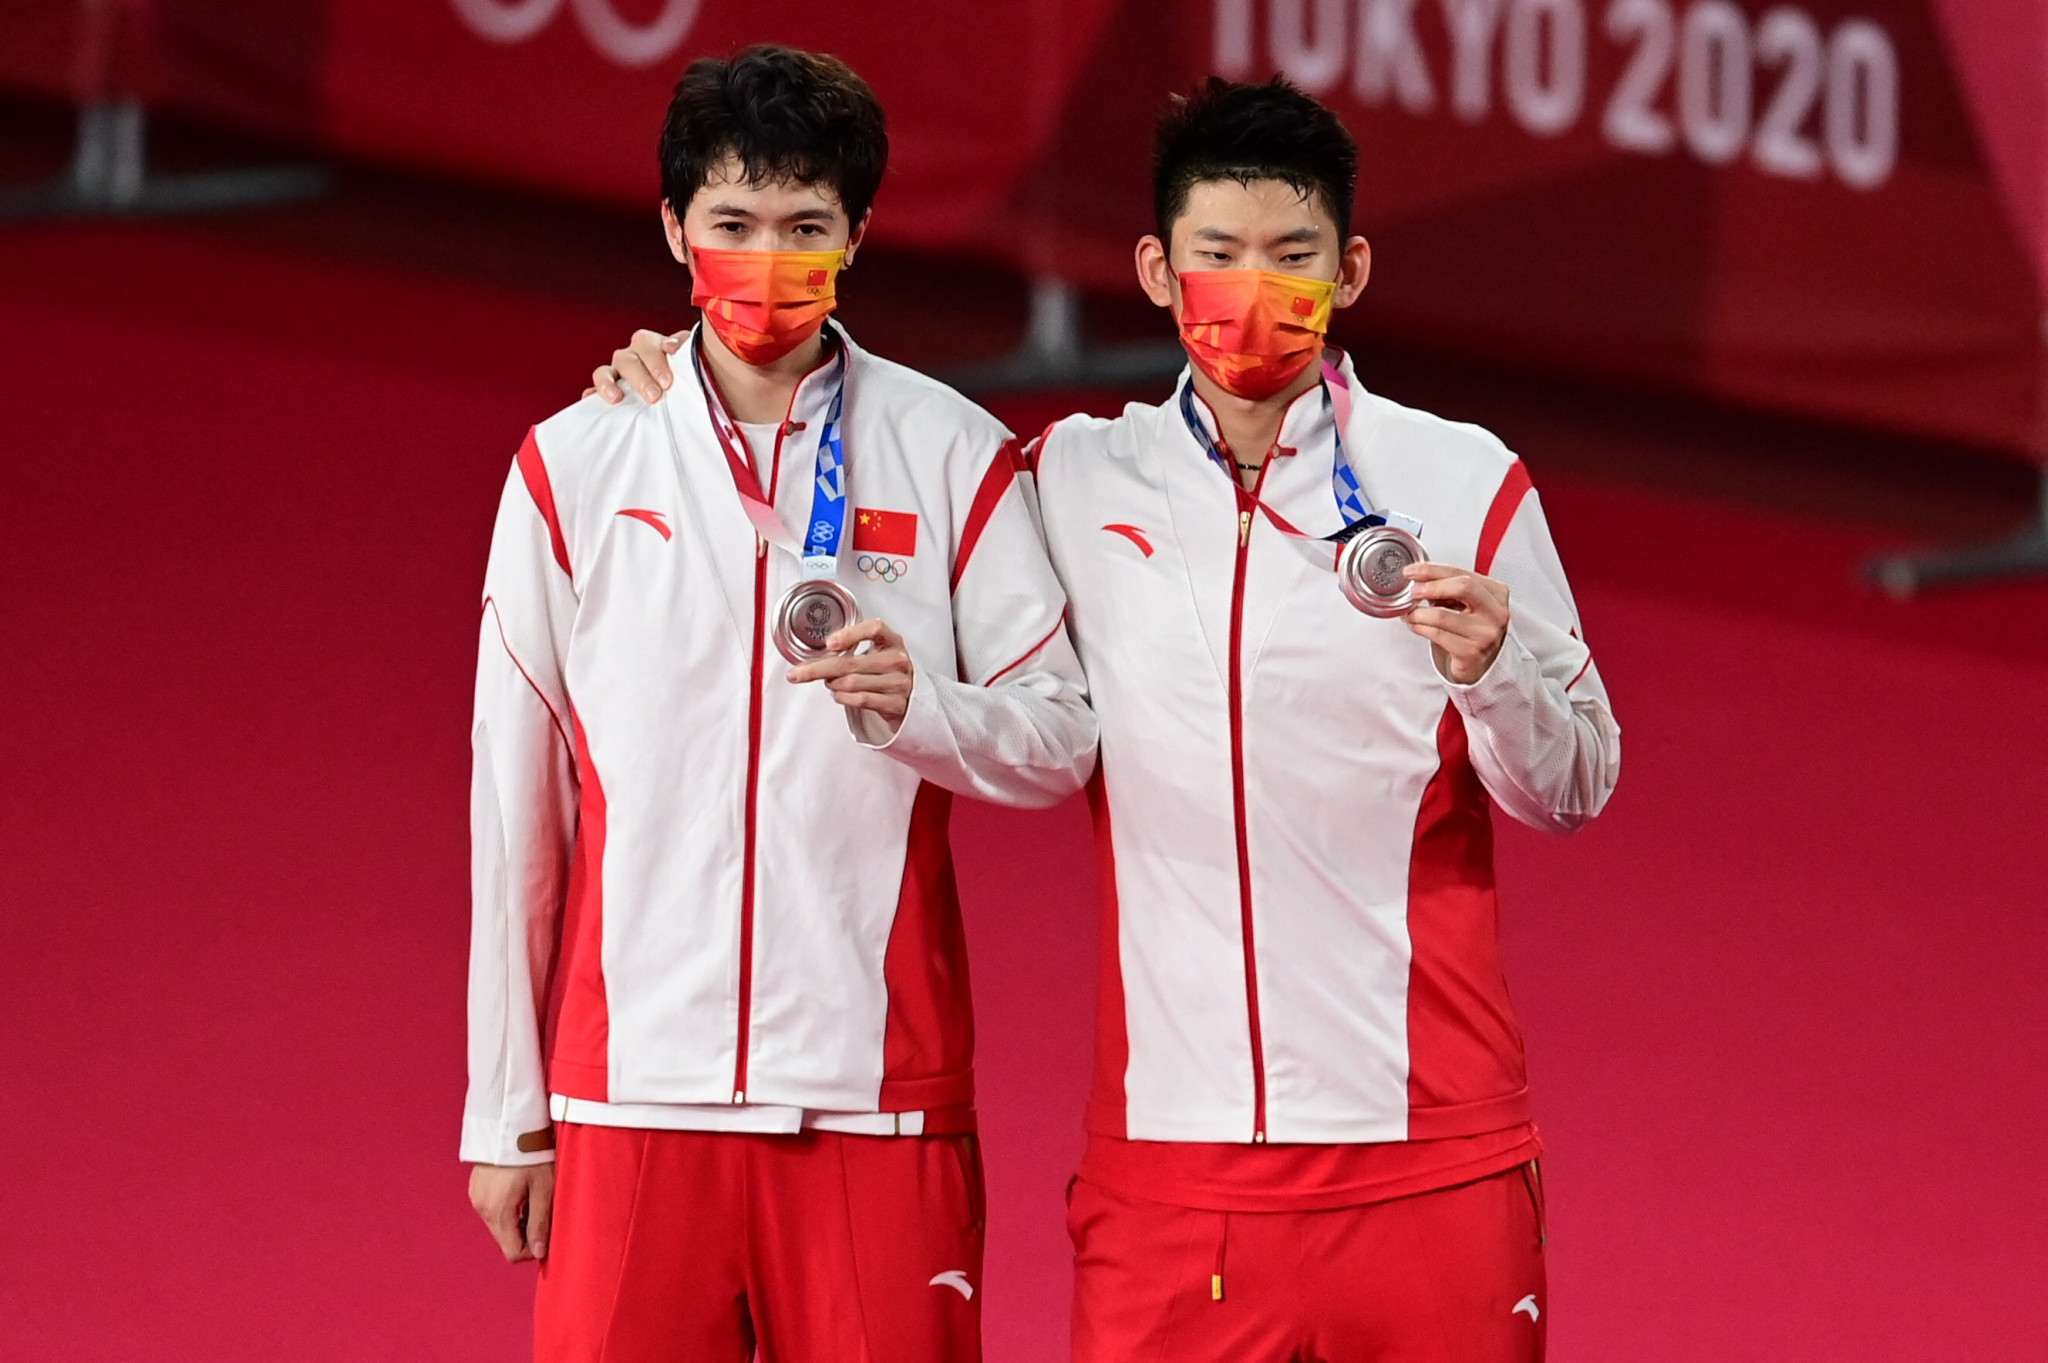 Olympic badminton doubles medallists receive suspended bans in integrity case